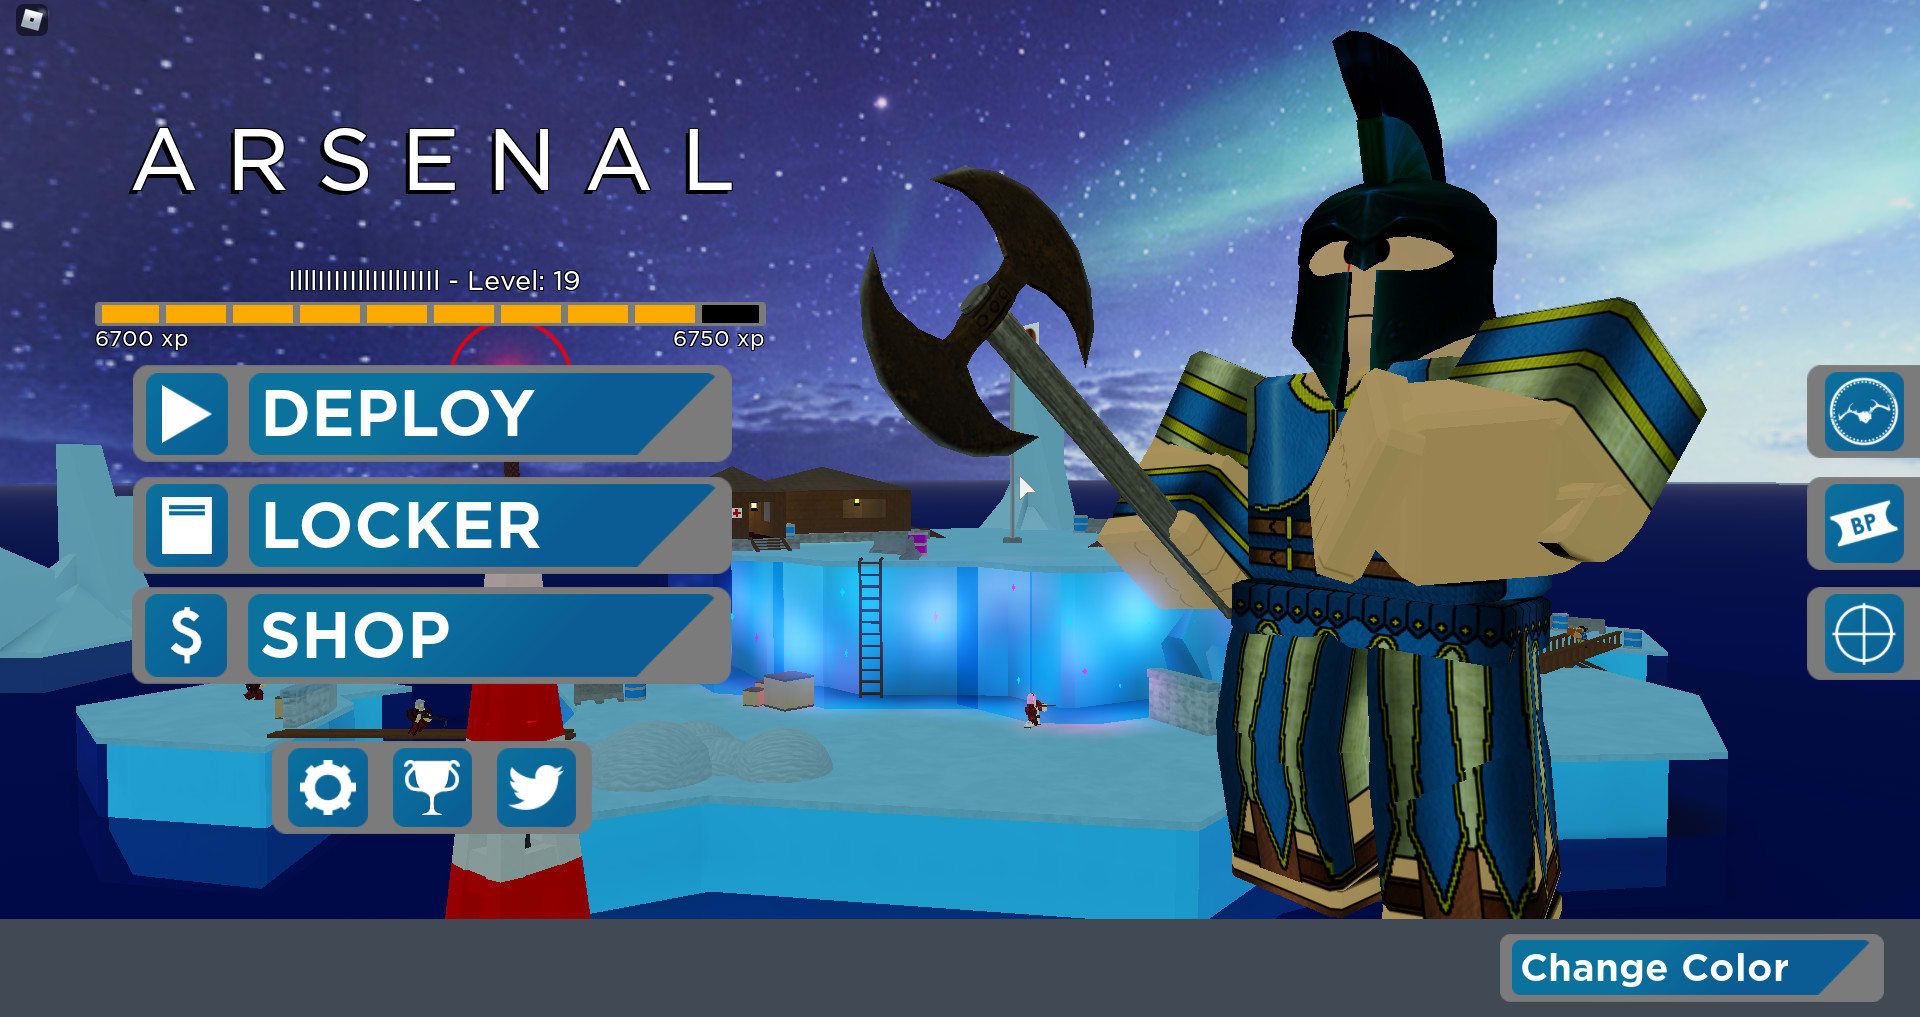 Boost Your Roblox Arsenal Account By Smilodon Gaming - fiverr roblox arsenal